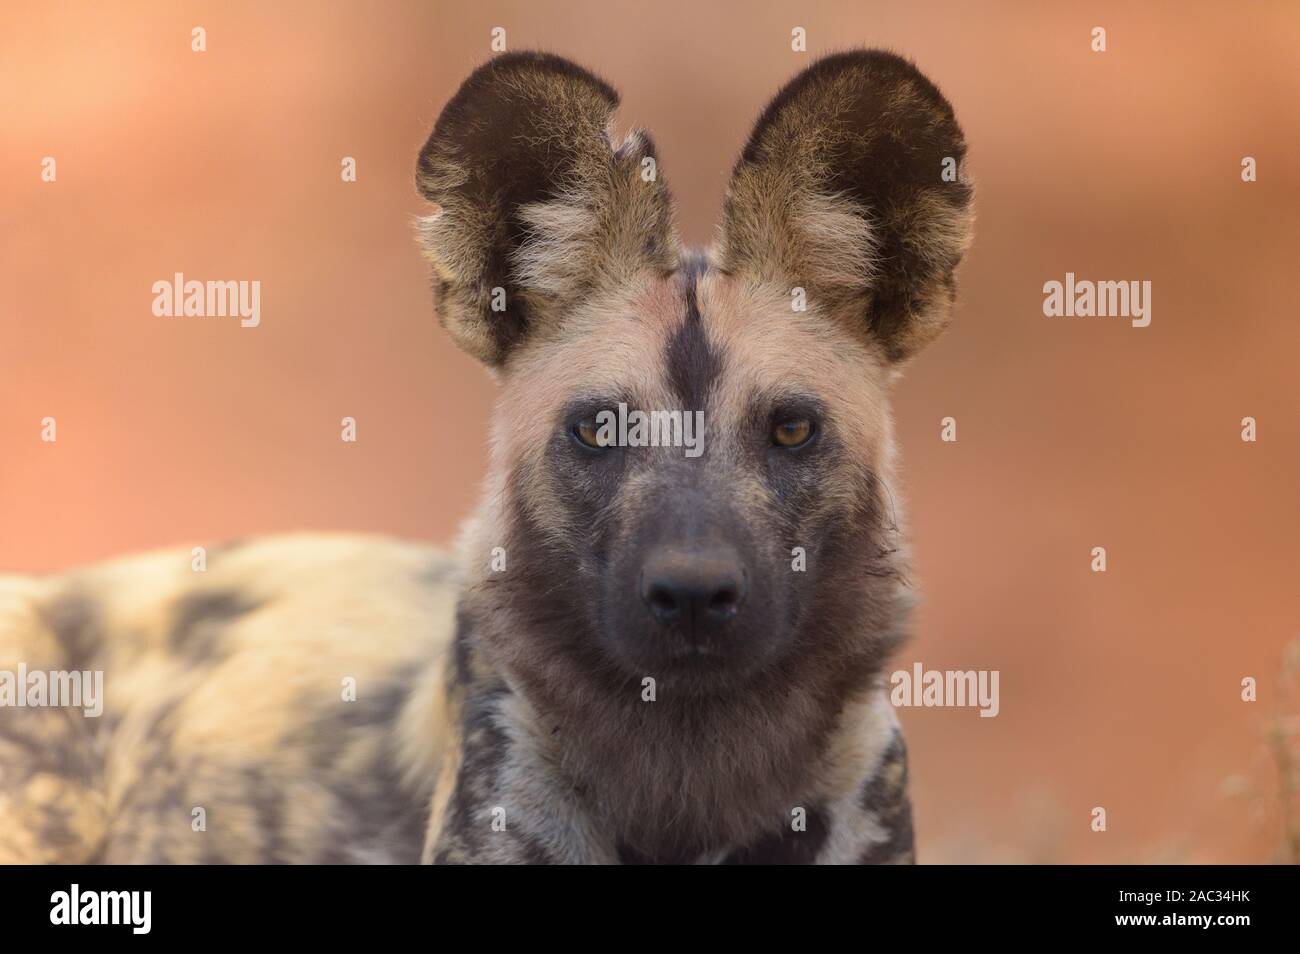 African wild dog, Painted wolf portrait Stock Photo